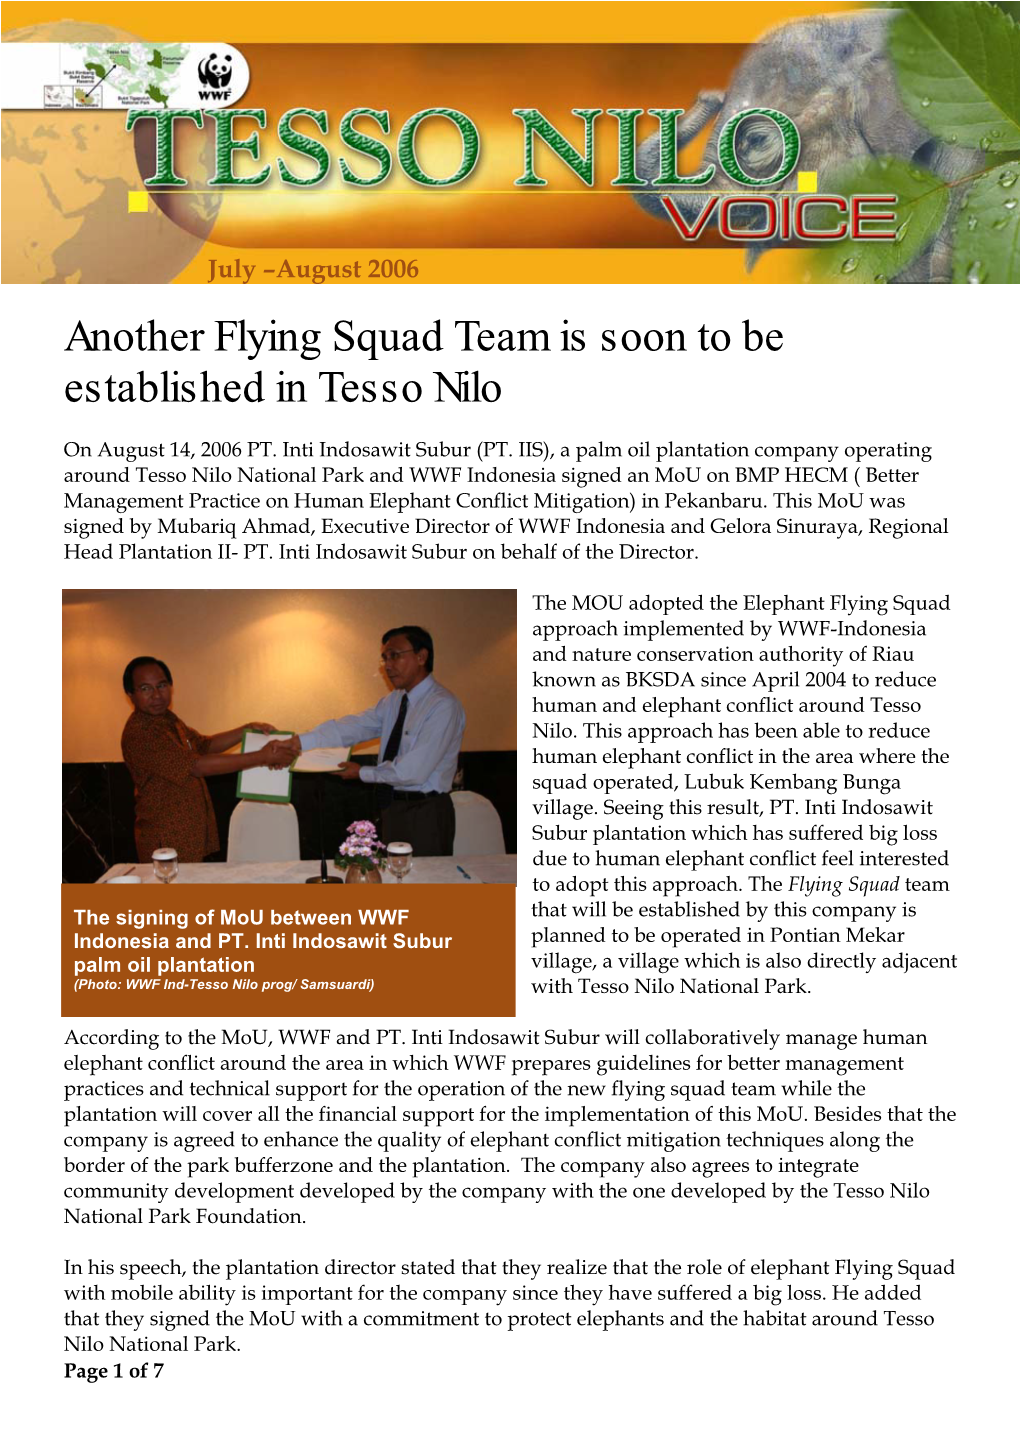 Another Flying Squad Team Is Soon to Be Established in Tesso Nilo